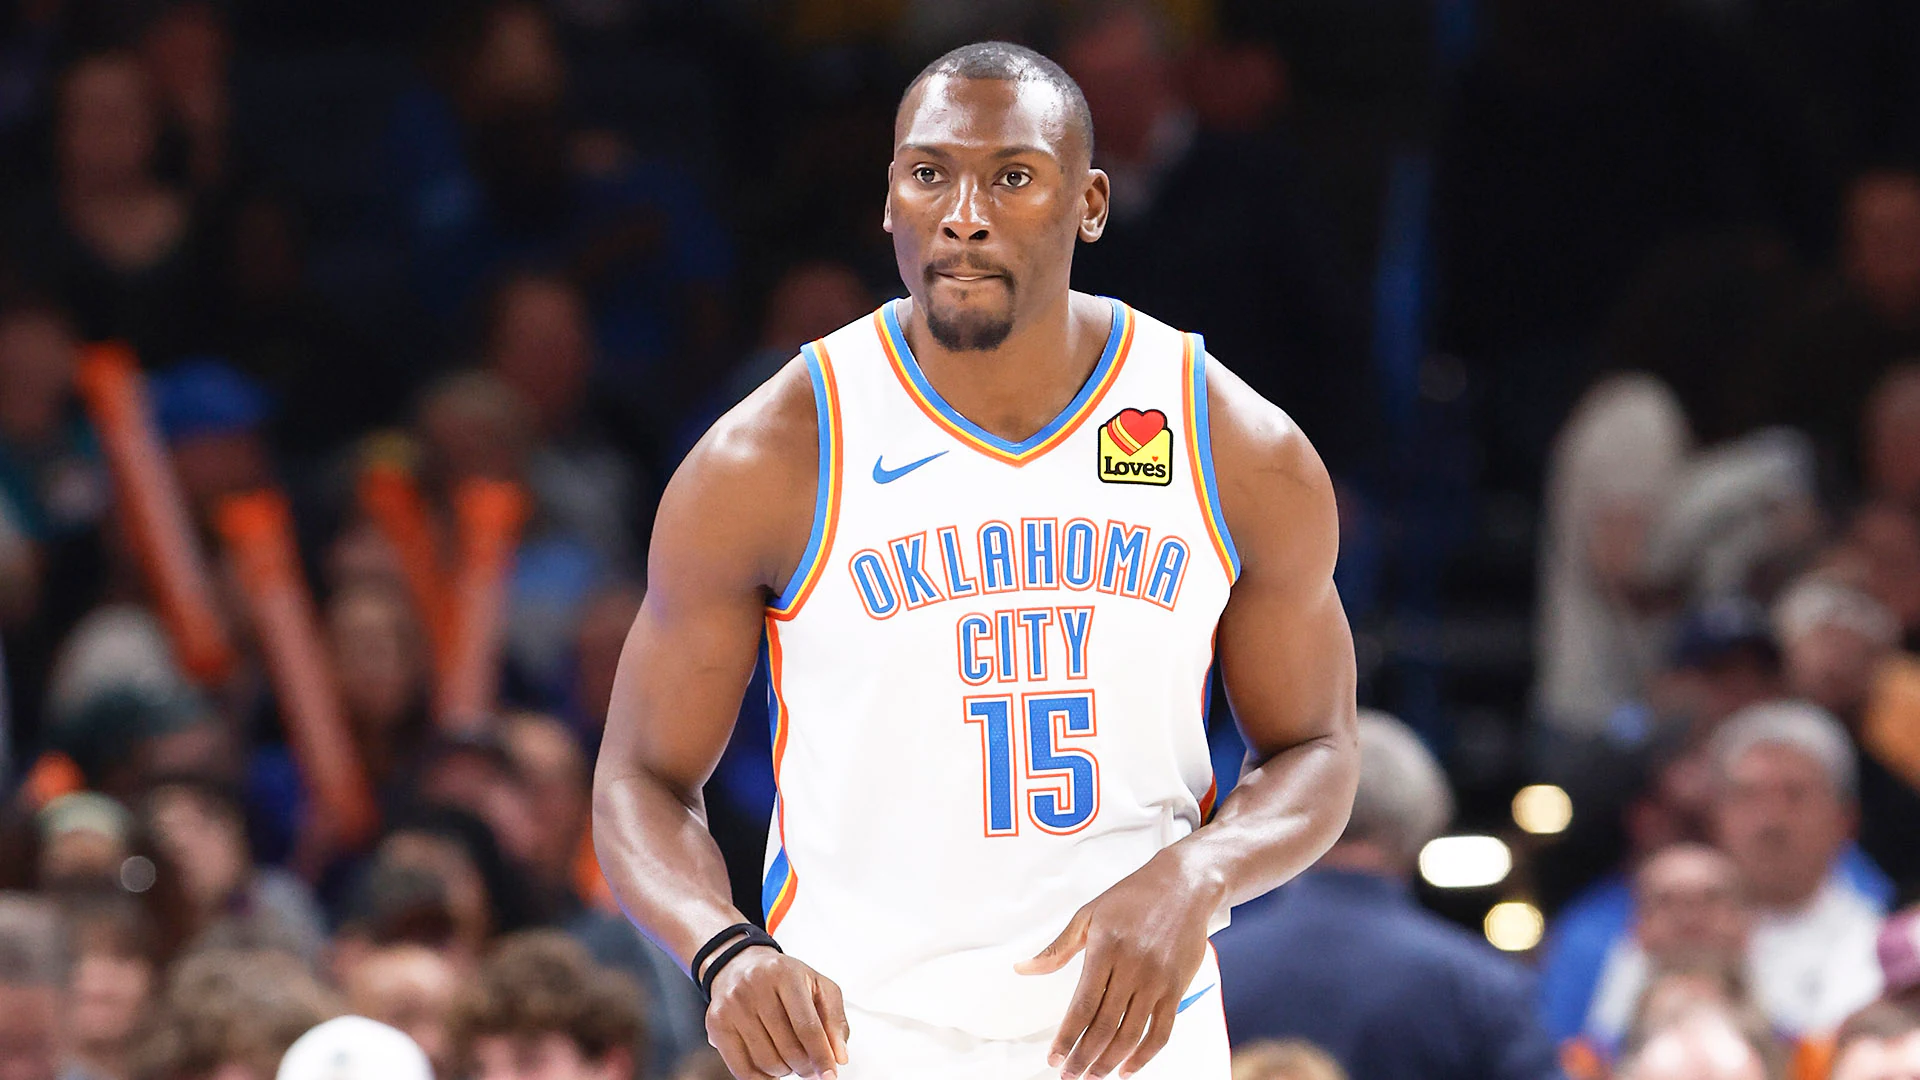 Bismack Biyombo appears to collapse during Thunder game at Portland